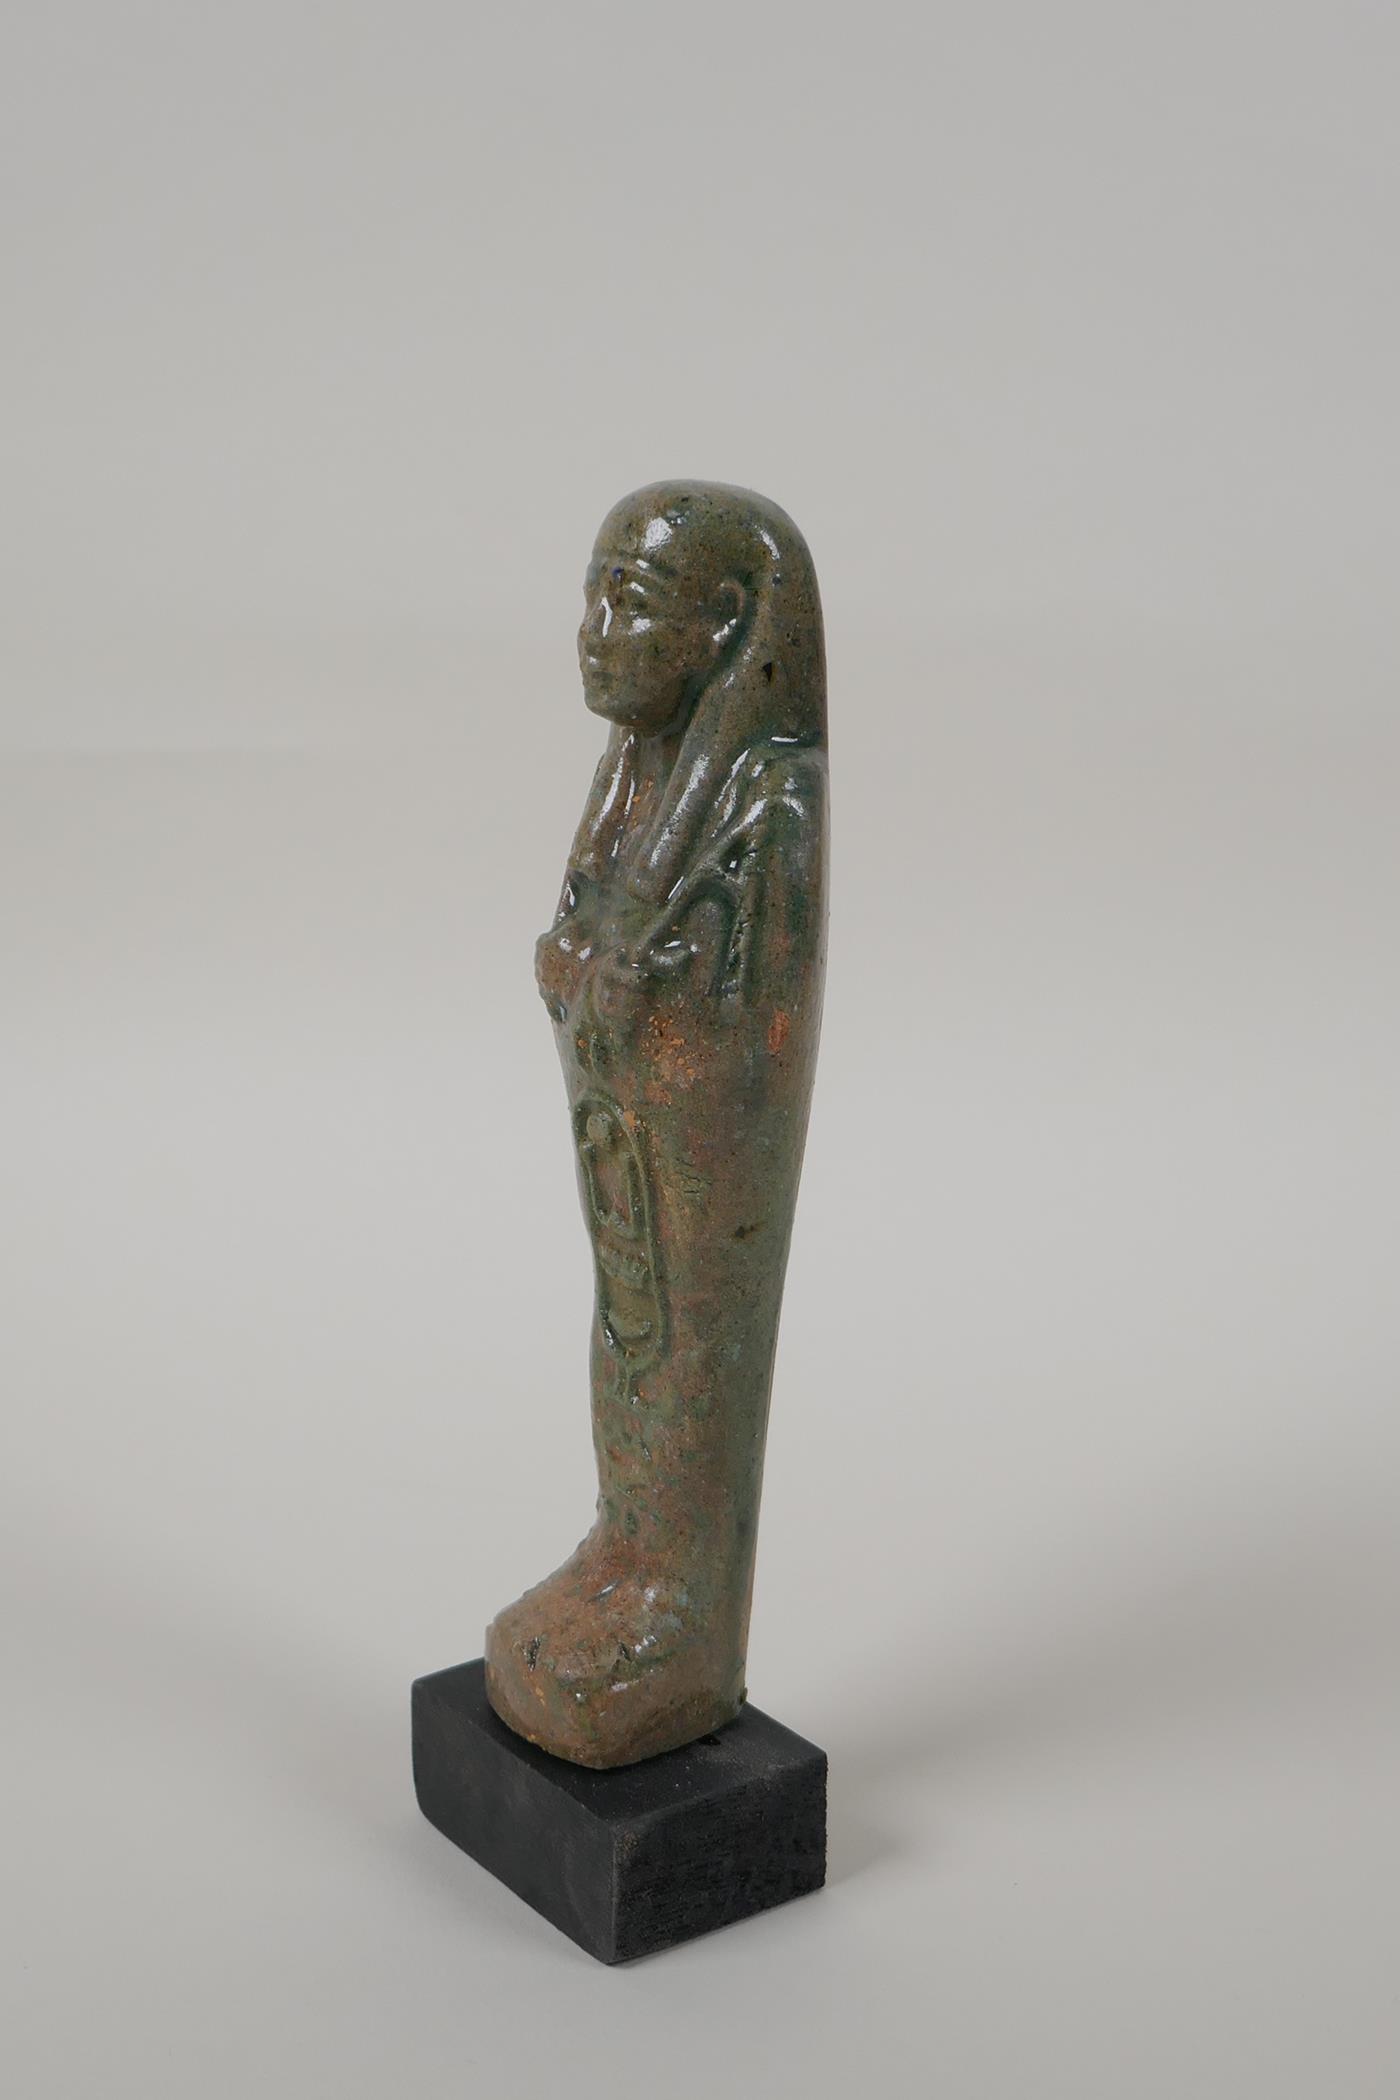 An Egyptian turquoise glazed faience shabti, mounted on a display base, 7" high - Image 4 of 4